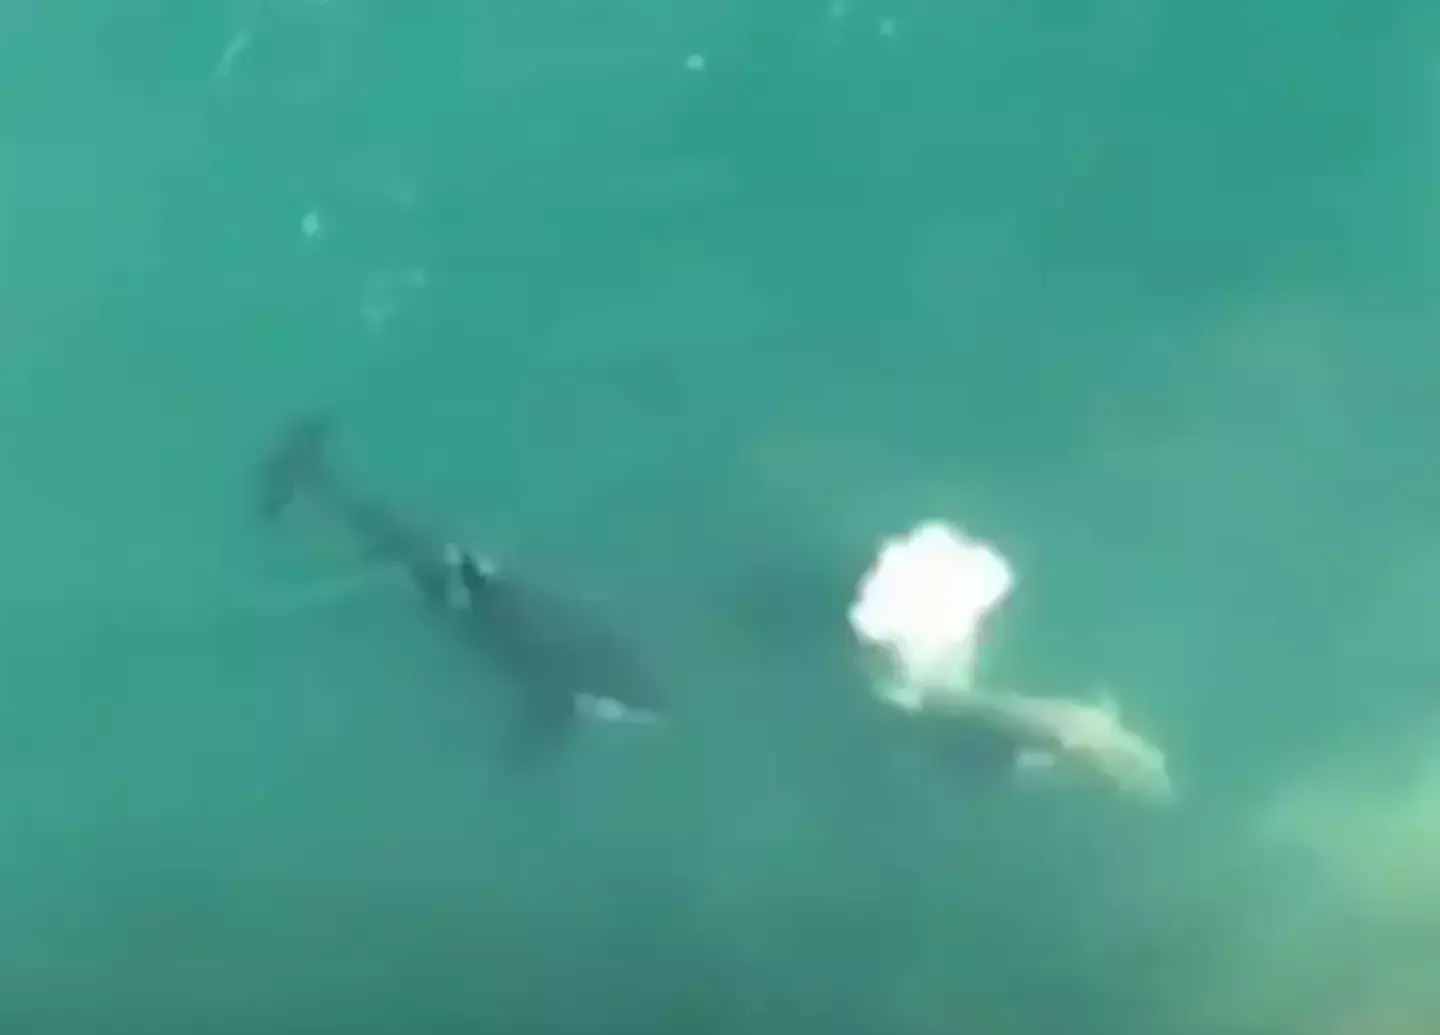 Footage showed the shark being circled by three killer whales.